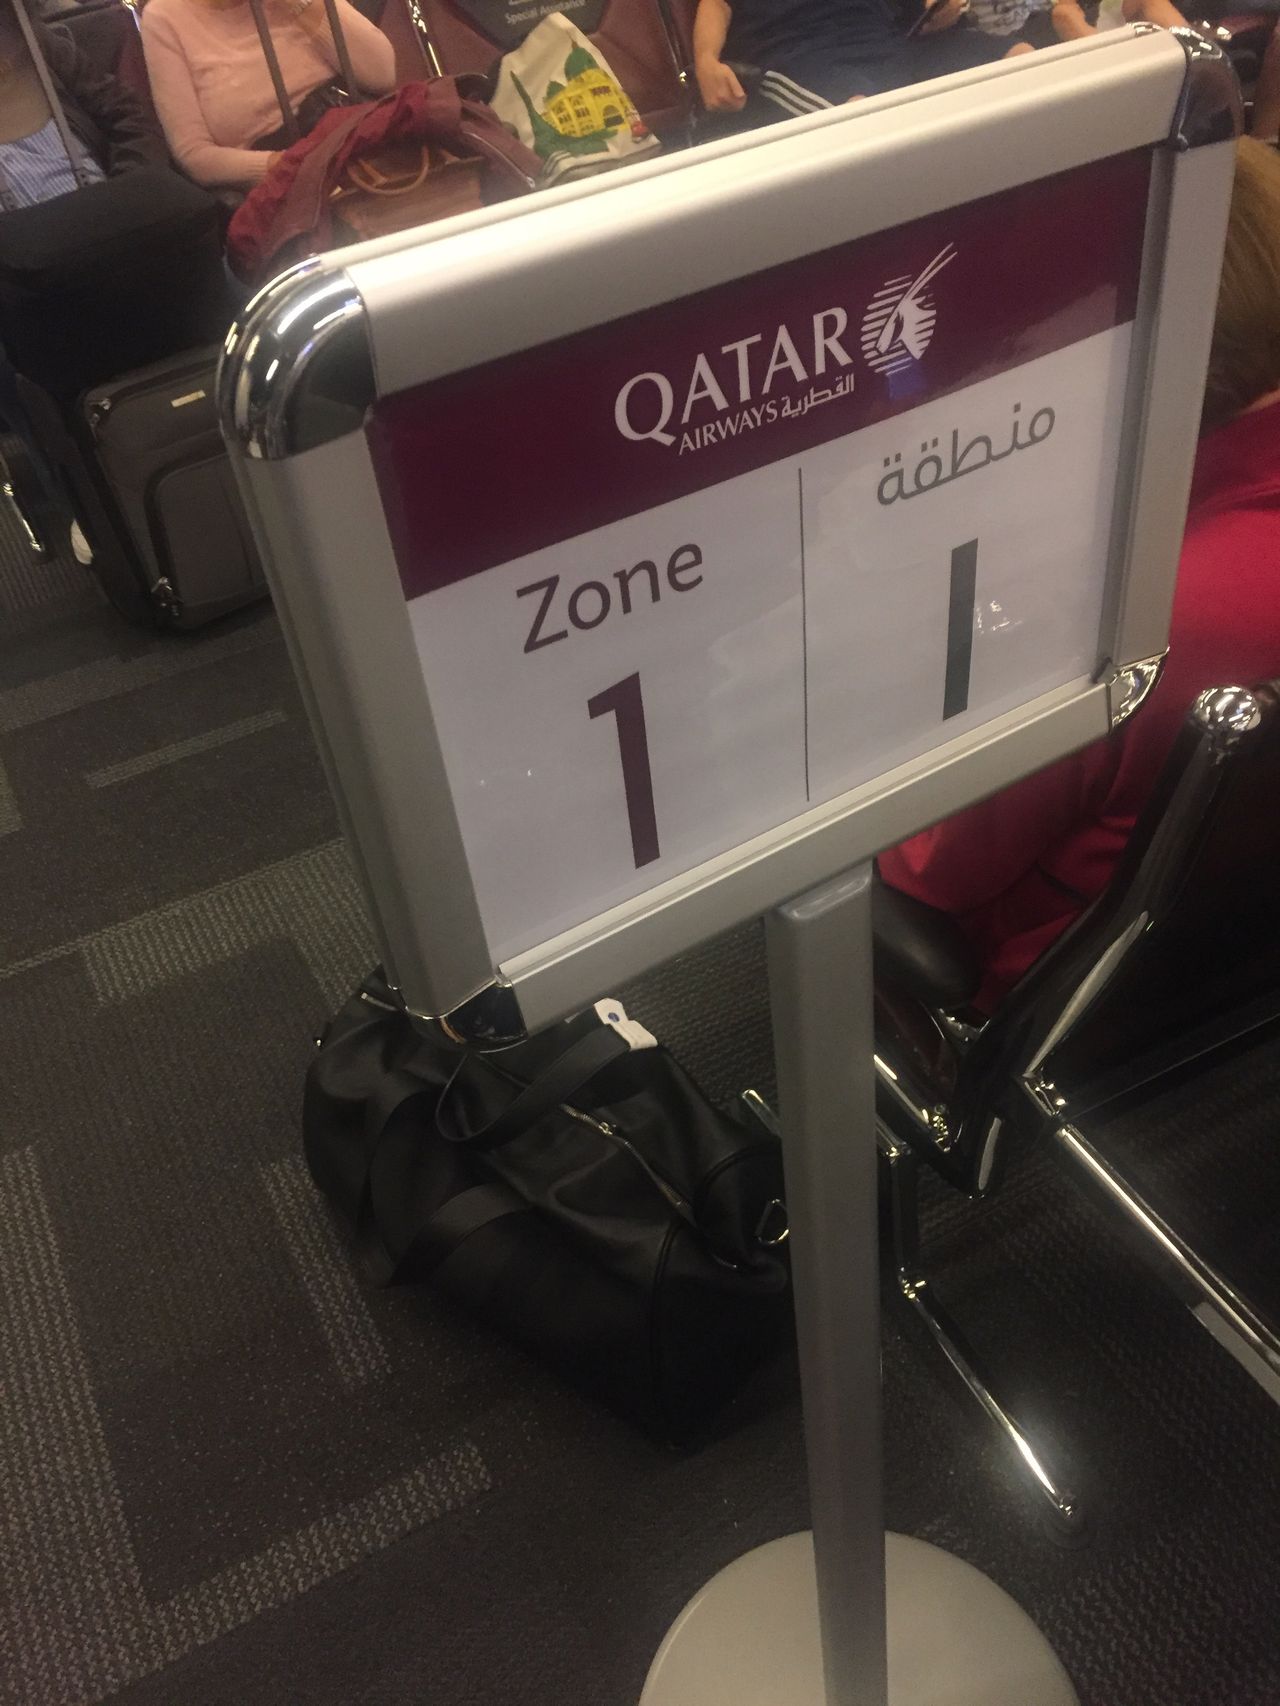 Review of Qatar Airways flight from Doha to Melbourne in Economy